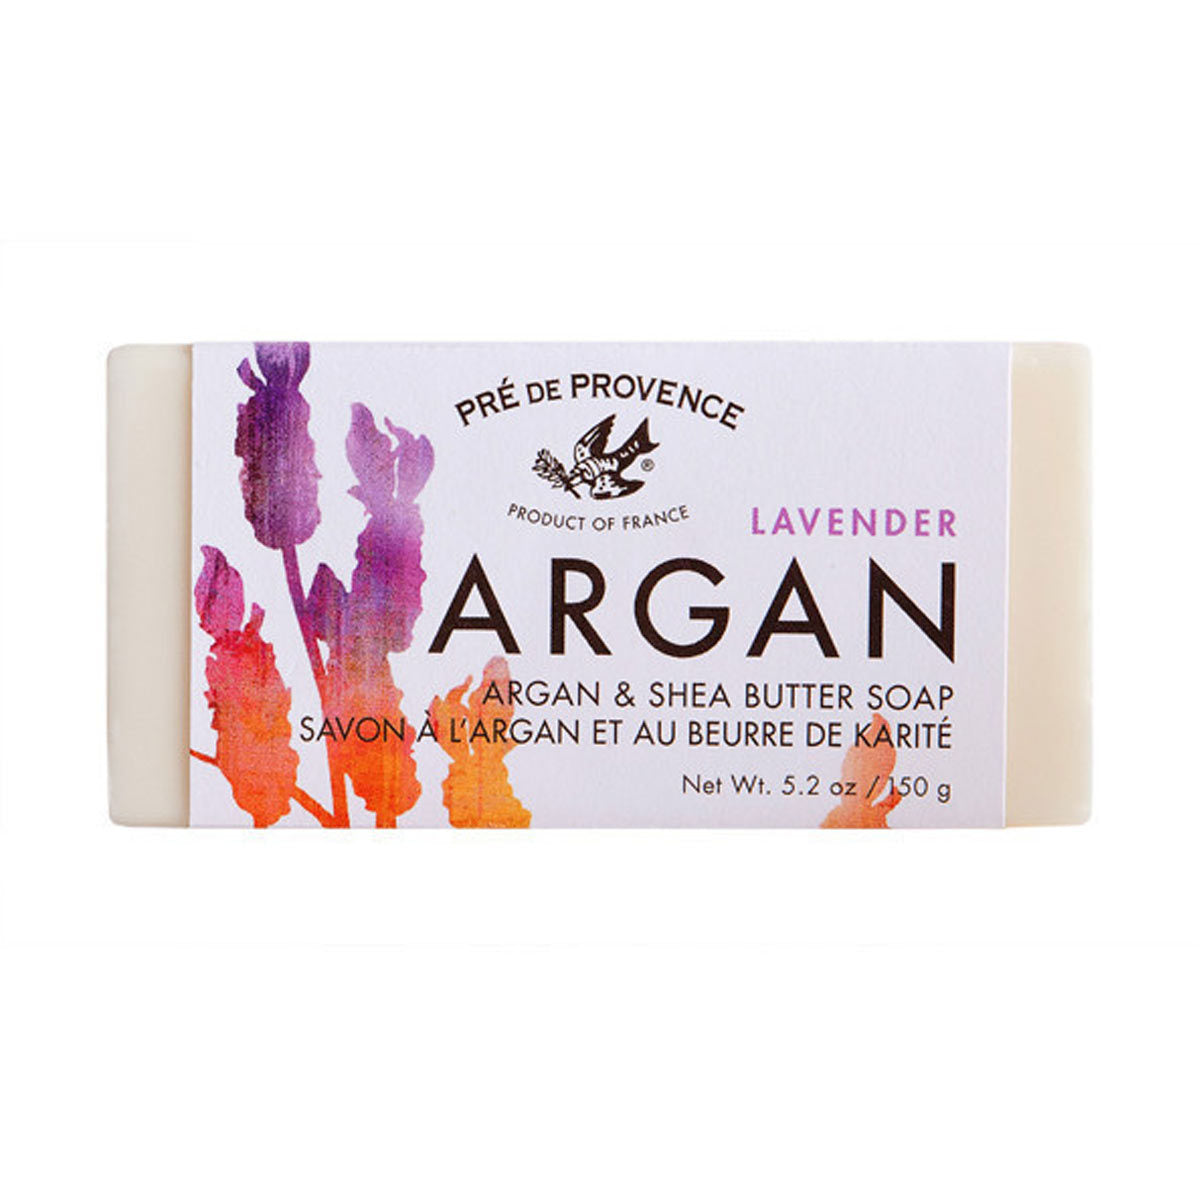 Primary image of Argan and Shea Butter Lavender Soap